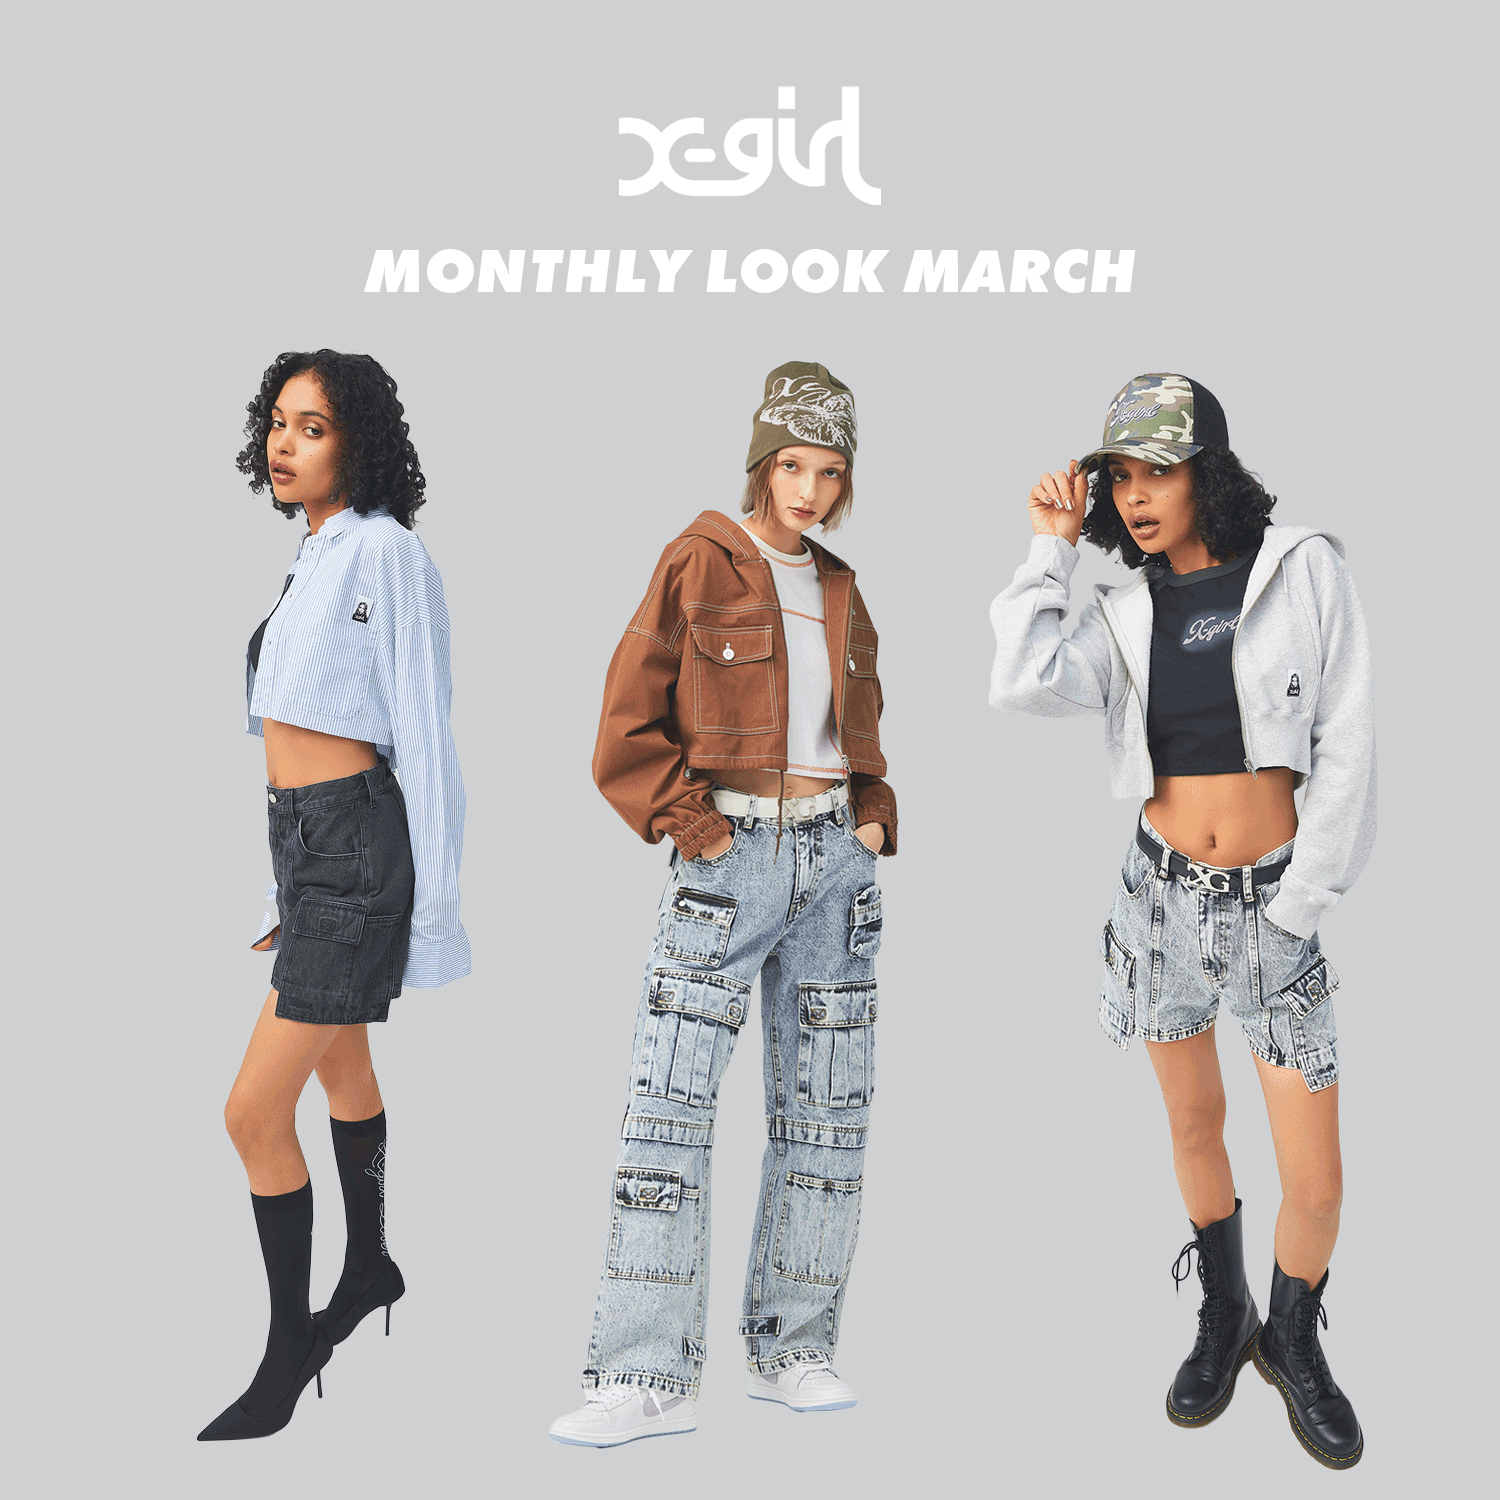 MONTHLY LOOK MARCH